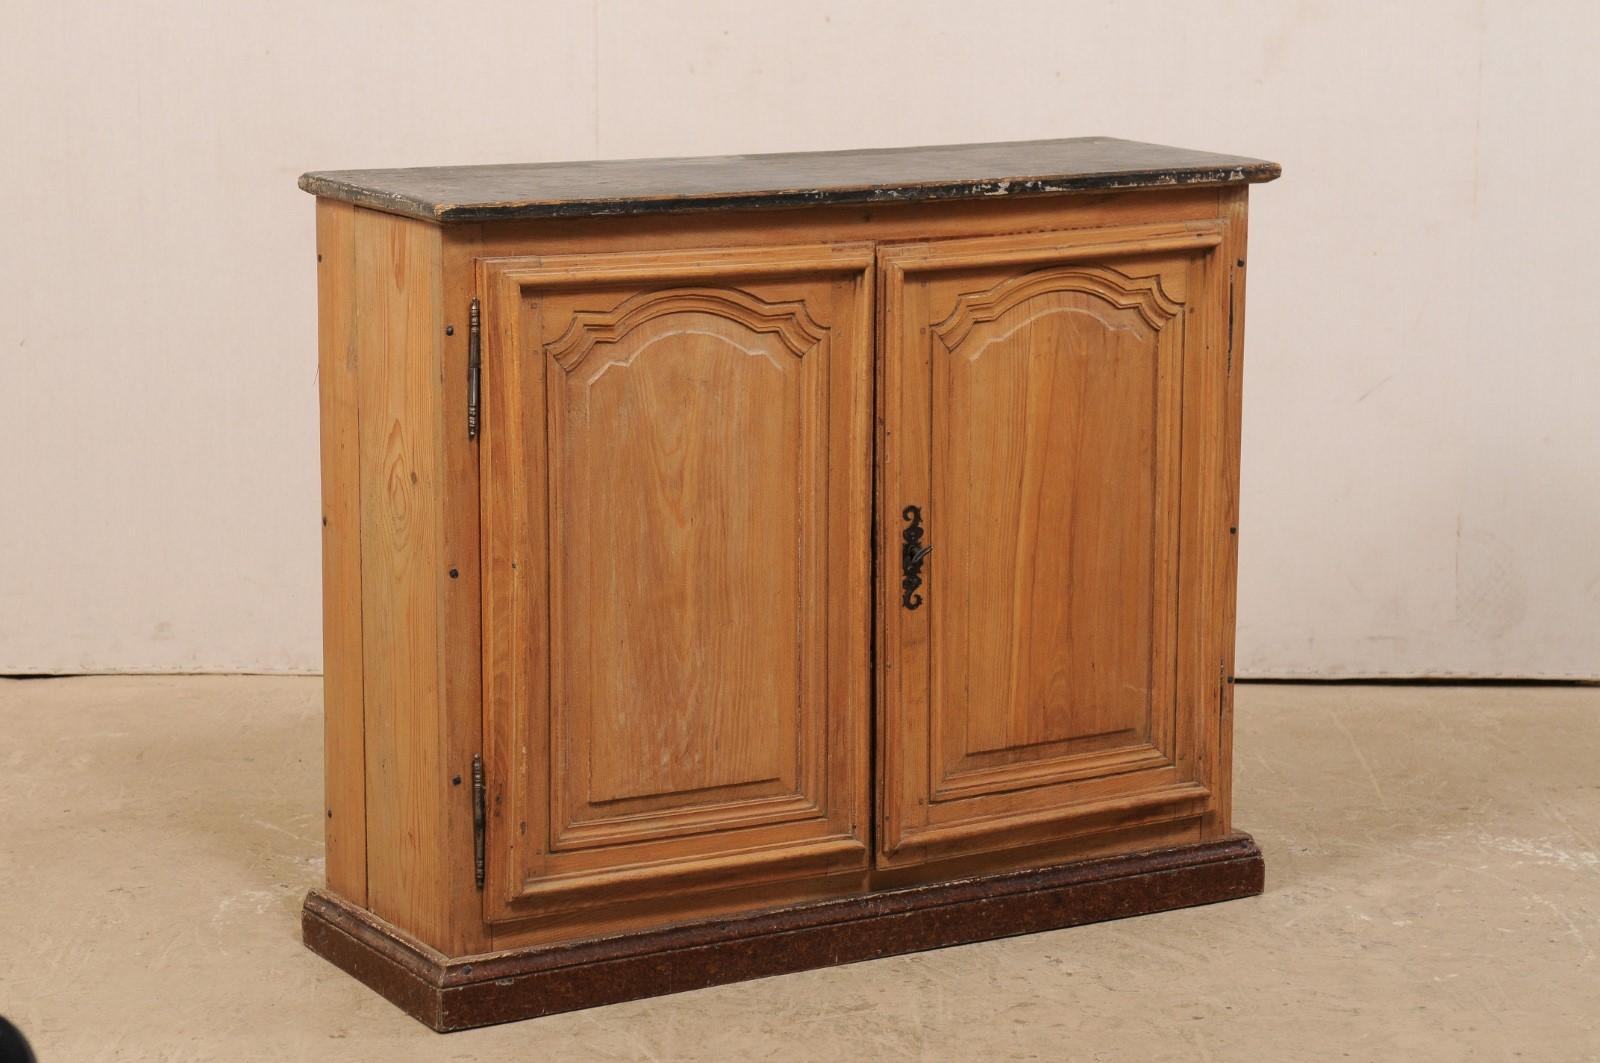 A French two-door wooden buffet with painted top from the 19th century. This antique cabinet from France features a rectangular-shaped top over a case fitted with a pair of nicely carved single panel doors, and is raised upon a stacked molding flat